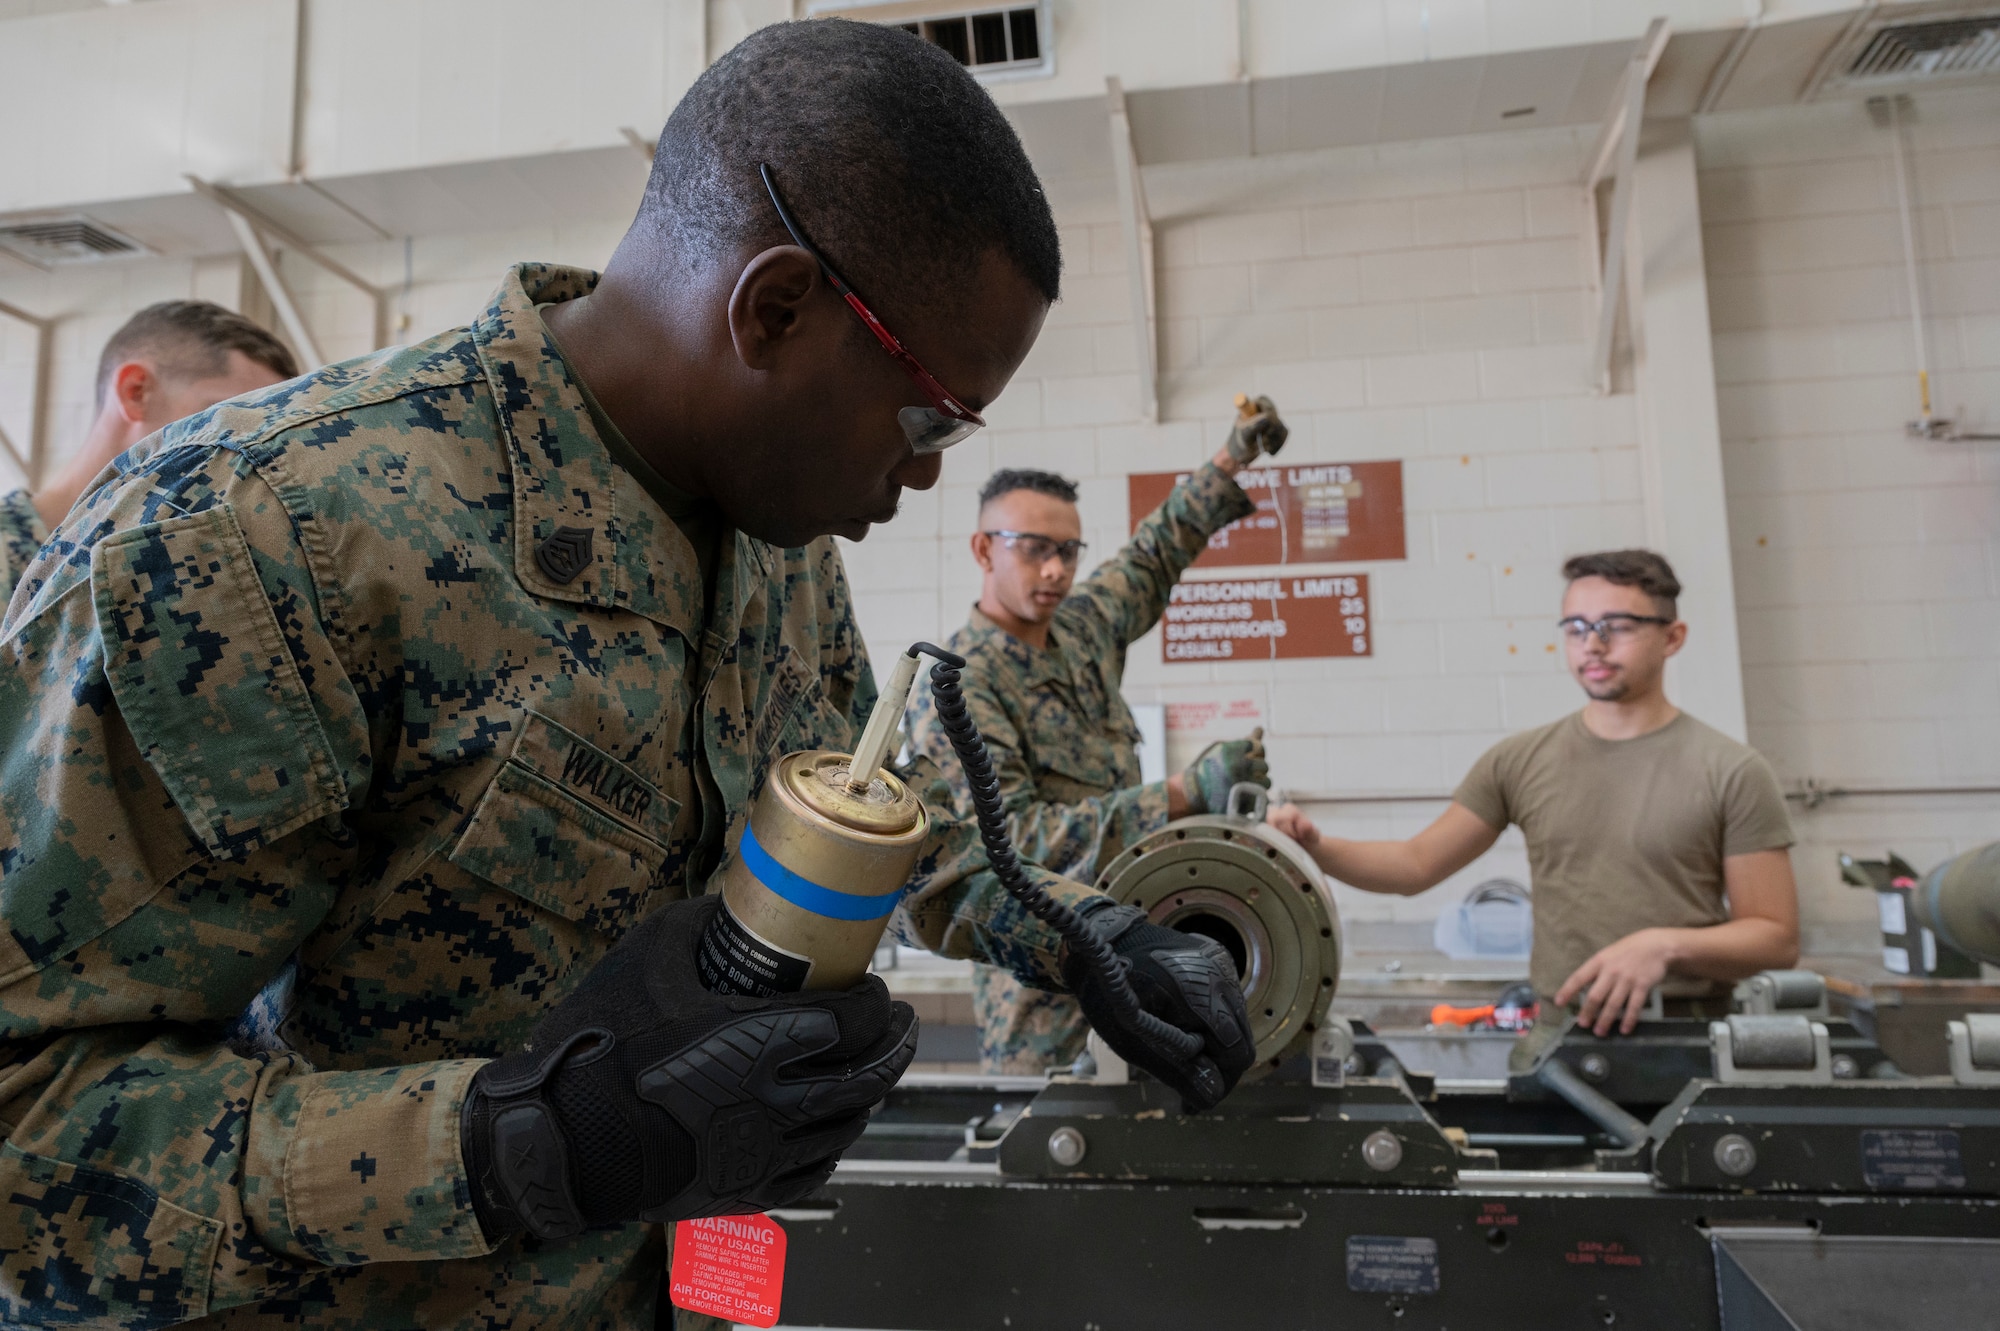 Airmen from the 7th Munitions Squadron and Detachment 1, 4th Combat Logistics Battalion 453 Marines build GBUs during a bomb building event at Dyess Air Force Base, Texas, Dec. 12, 2023. The 7th MUNS Conventional Maintenance section hosted a bomb build for Dyess Marine Corps personnel to network and foster relationships within joint services on base. (U.S. Air Force photo by Airman 1st Class Alondra Cristobal Hernandez)